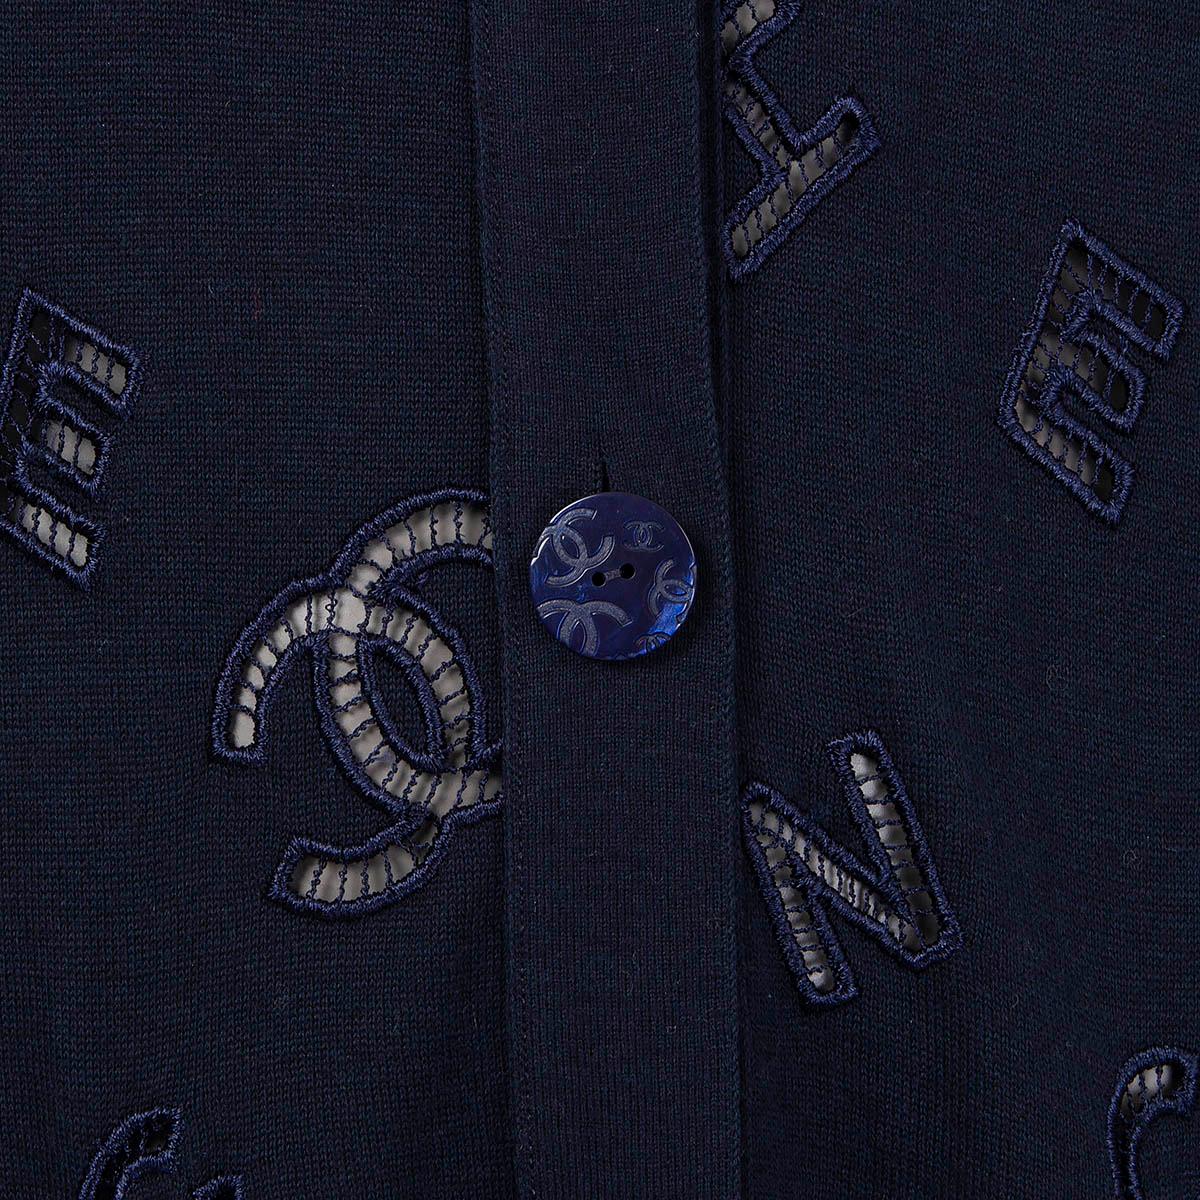 CHANEL navy blue cotton 2020 20C LOGO EMBROIDERED Cardigan Sweater 38 S 2